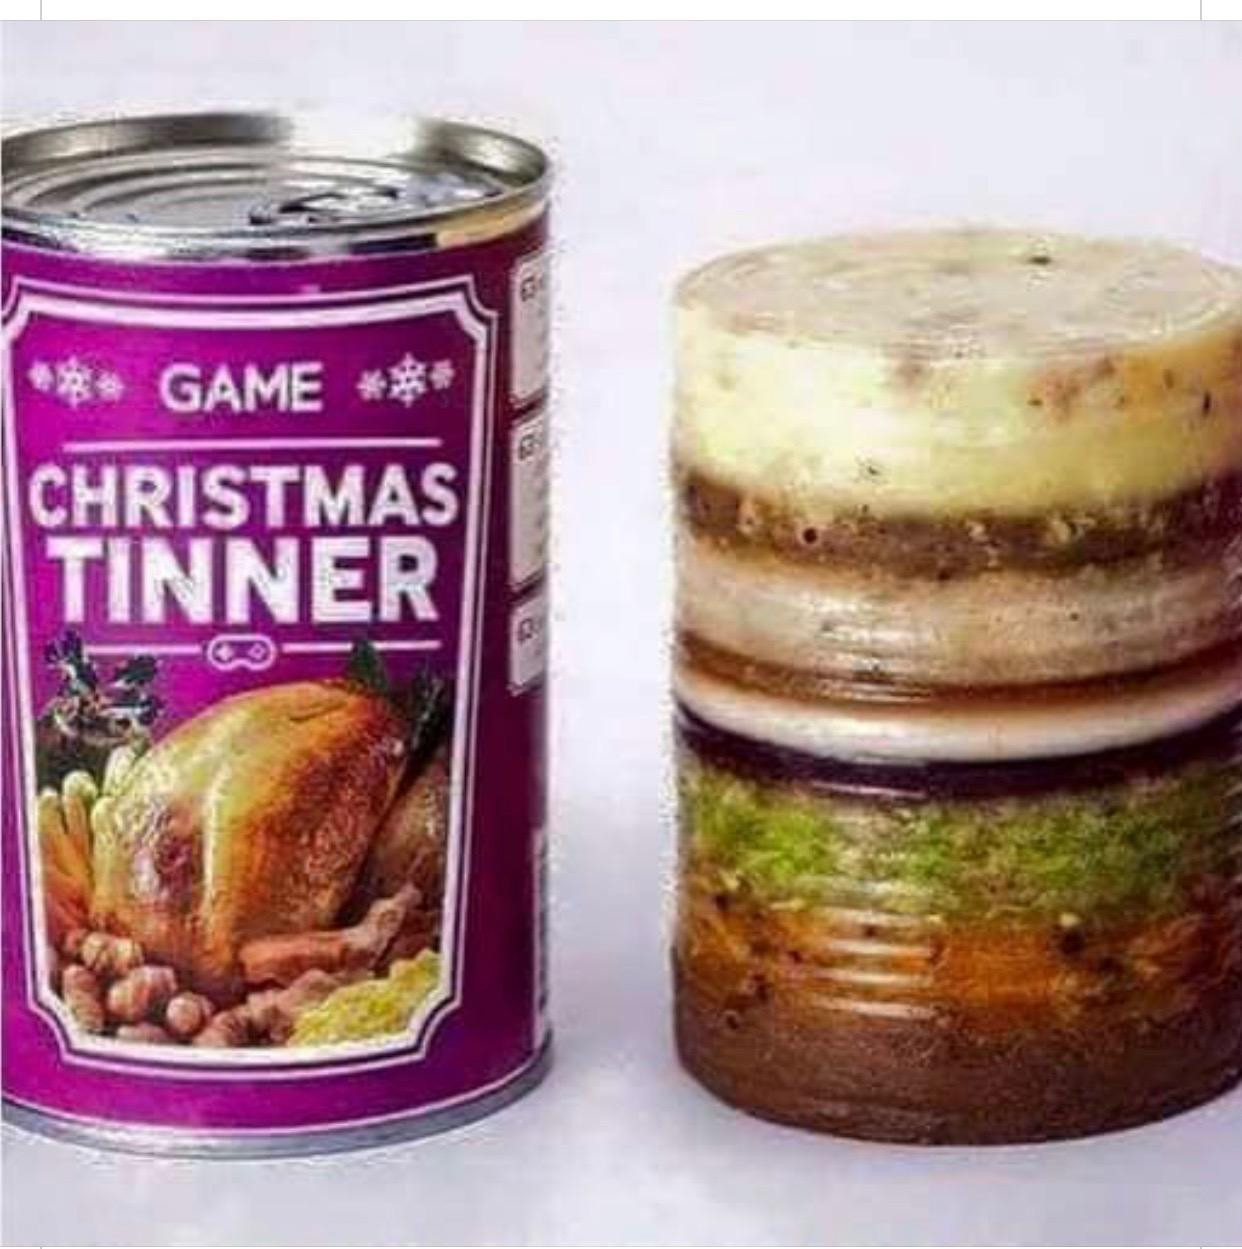 Craig'S Thanksgiving Dinner In A Can
 Christmas Tinner funny